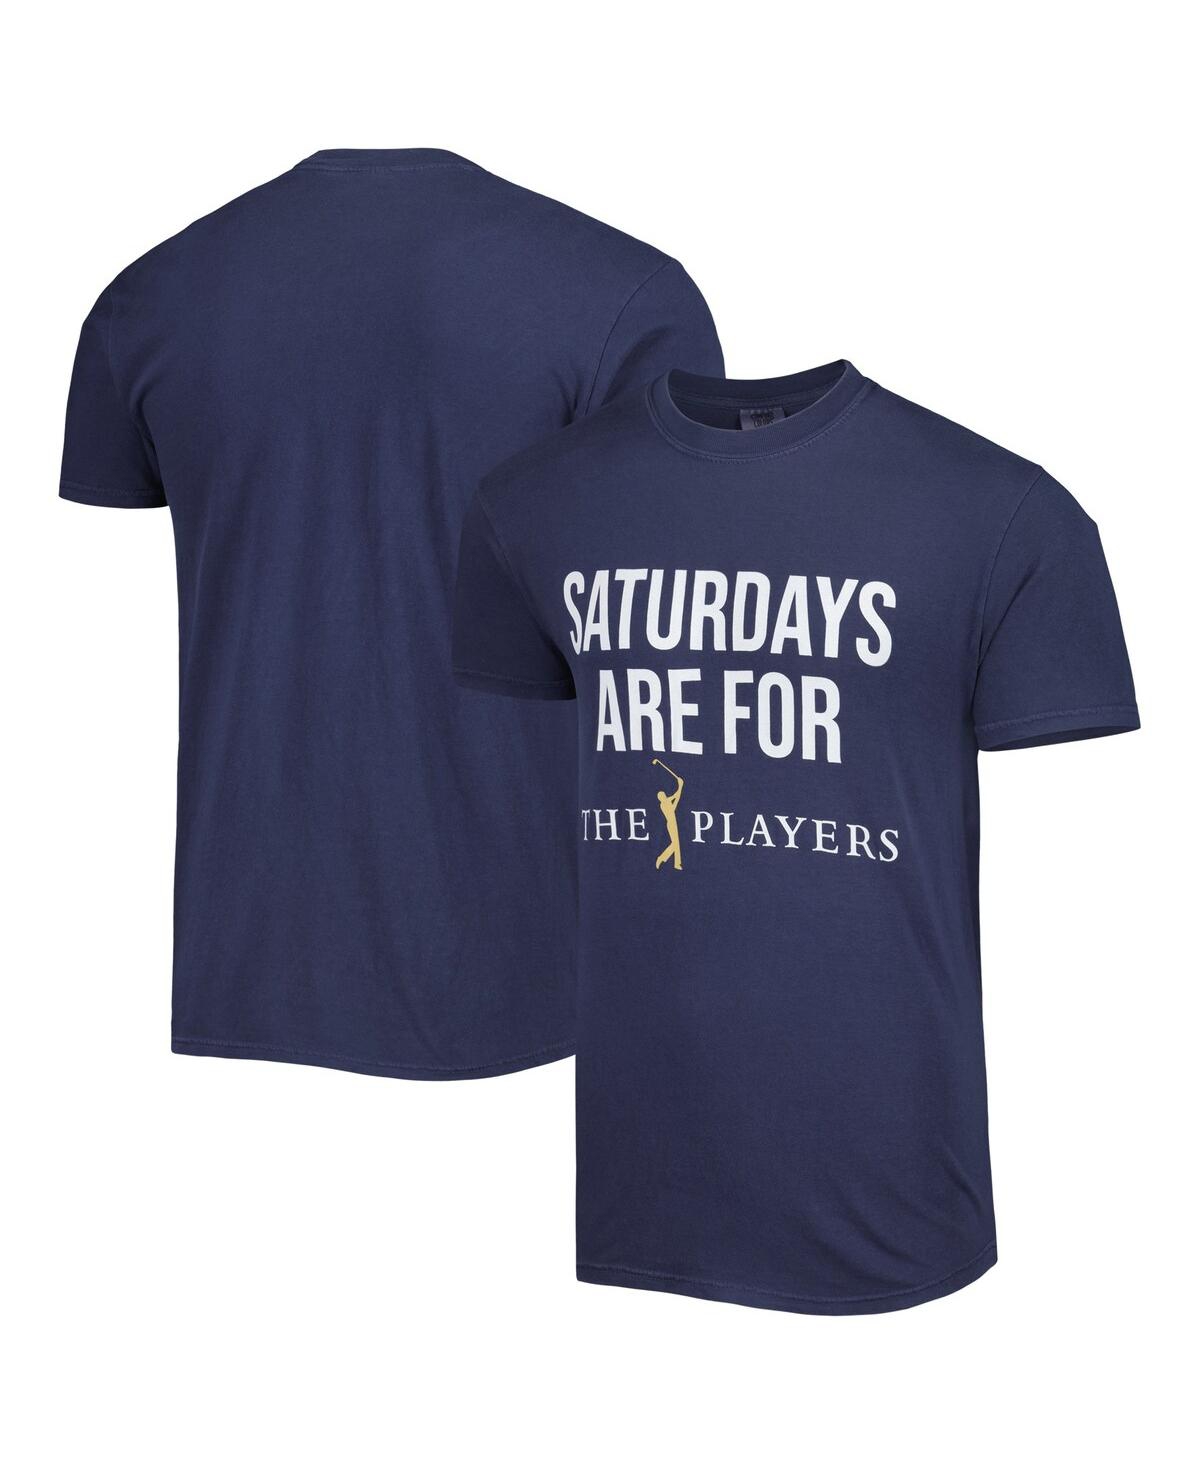 Men's Barstool Golf Navy The Players Saturdays Are For The Players T-shirt - Navy